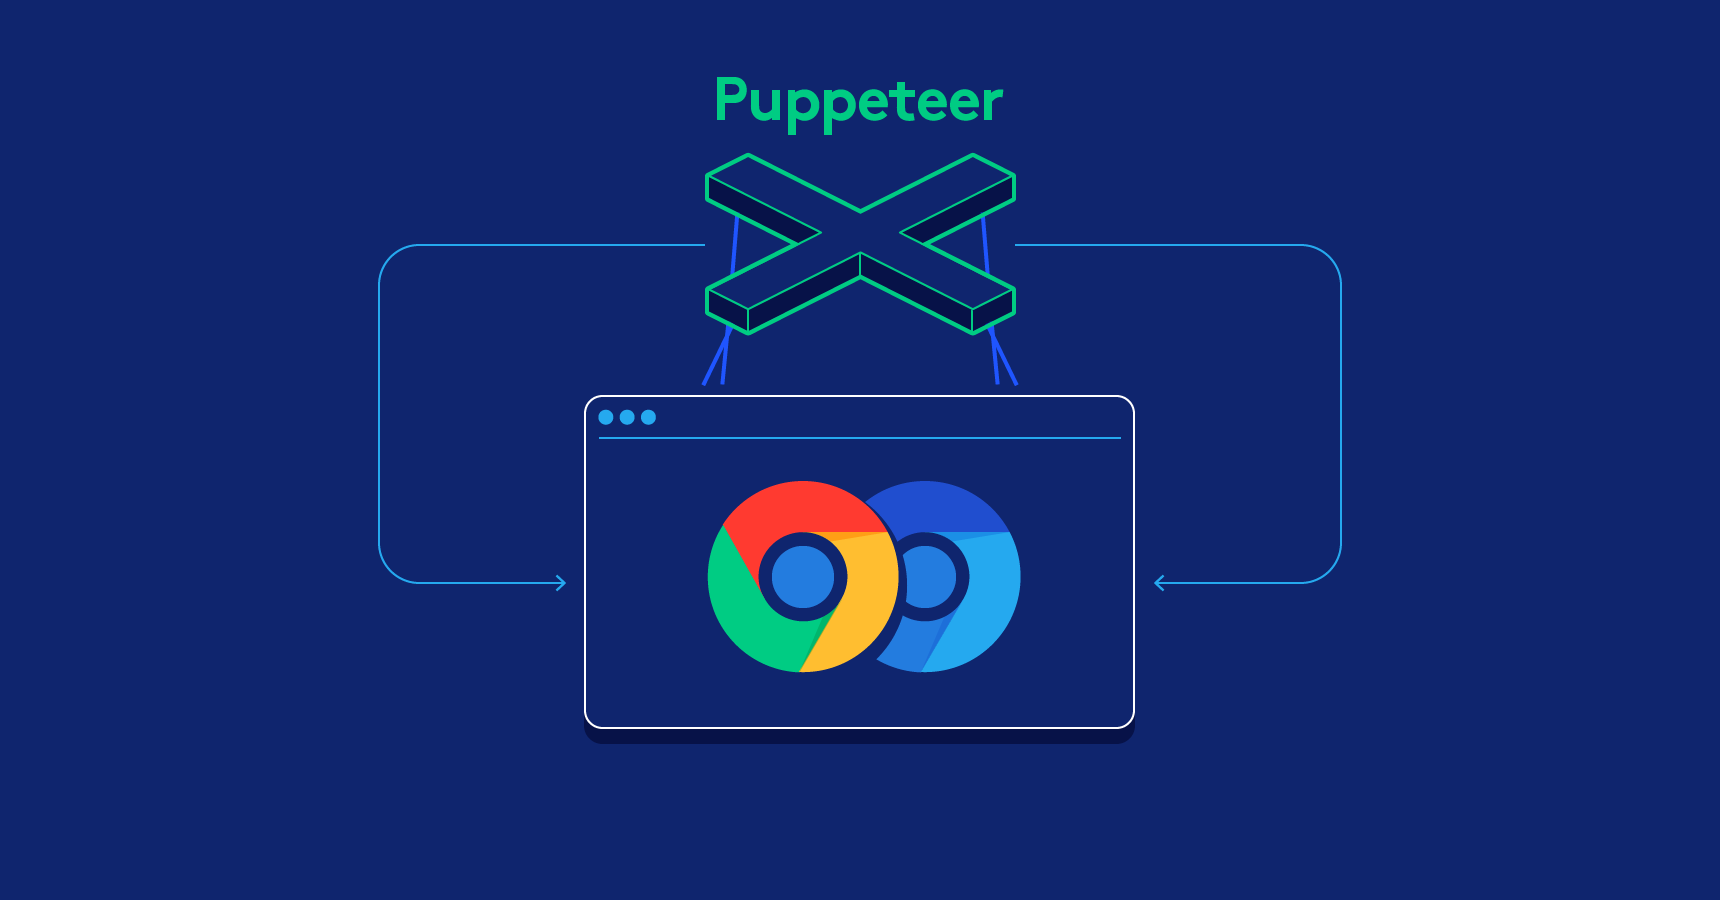 Web Scraping with a Headless Browser: A Puppeteer Tutorial